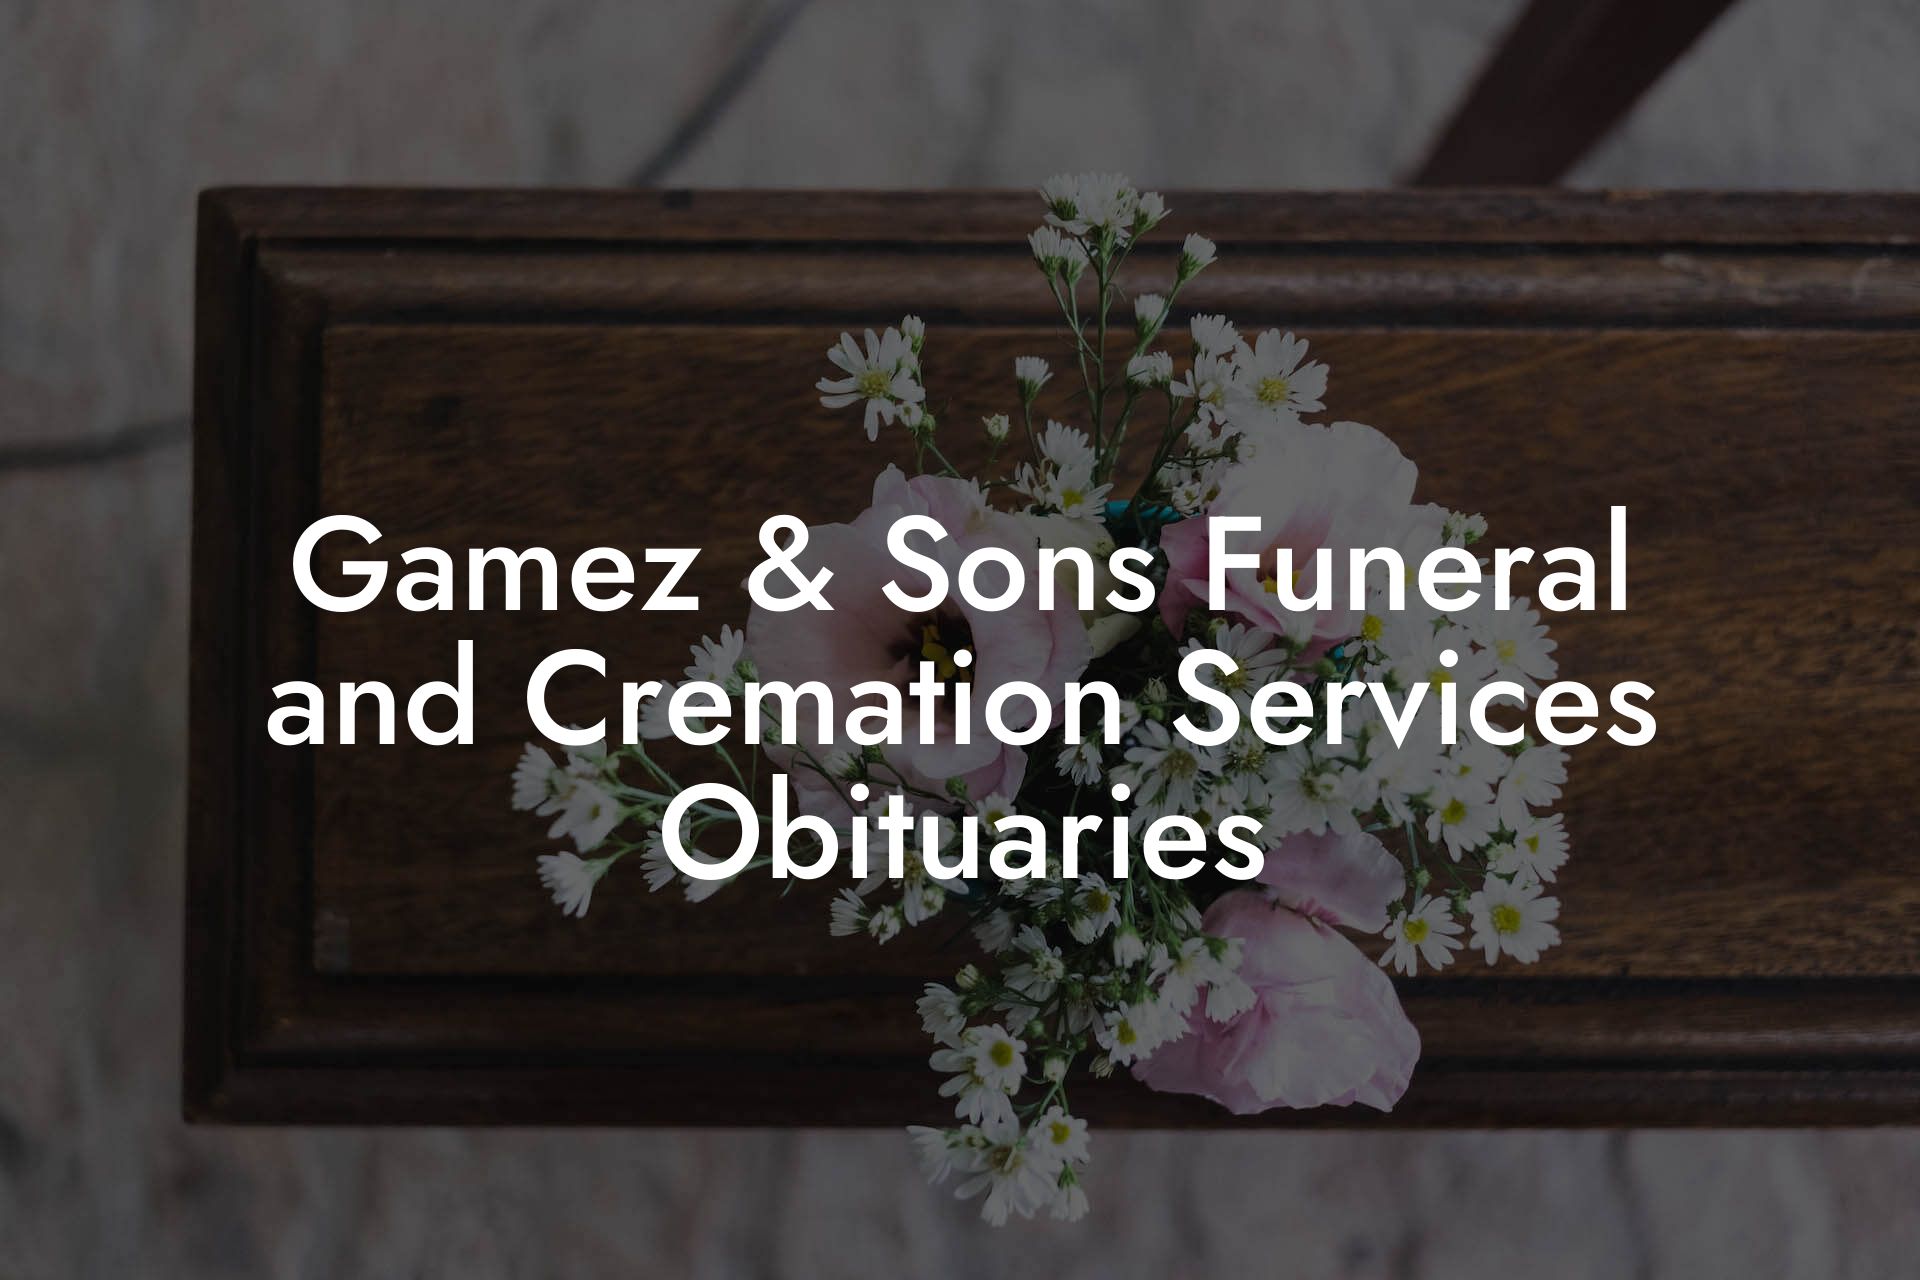 Gamez & Sons Funeral and Cremation Services Obituaries